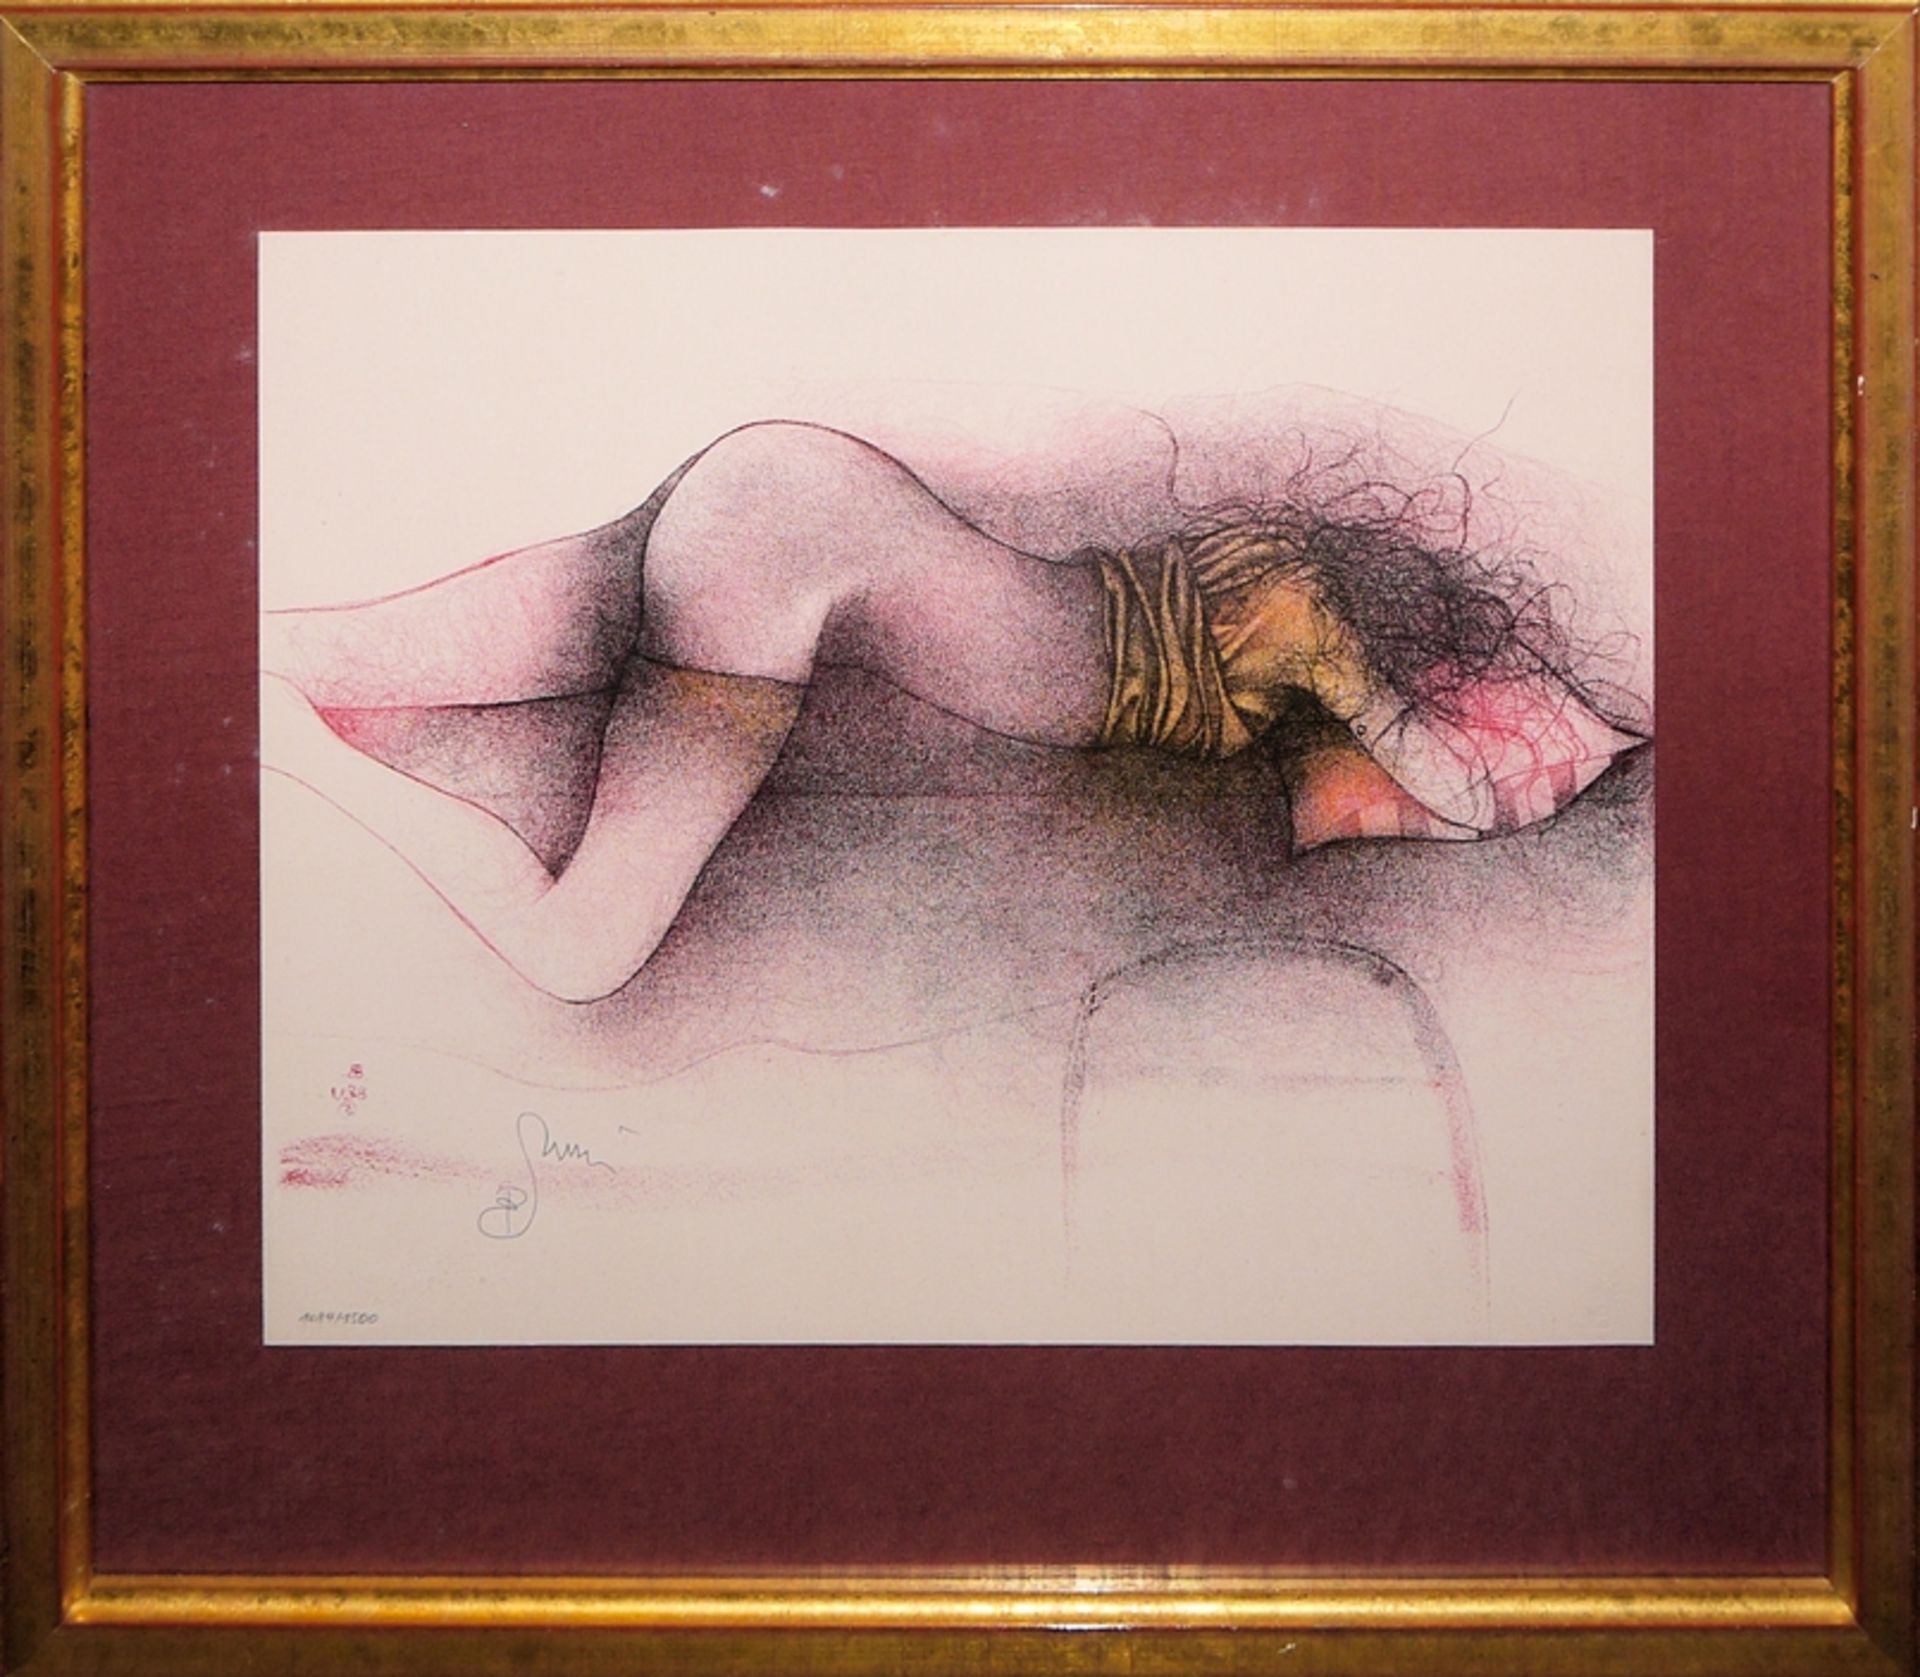 Bruno Bruni, Summer in Umbria & "Amanti", 4 signed colour lithographs from 1978, framed